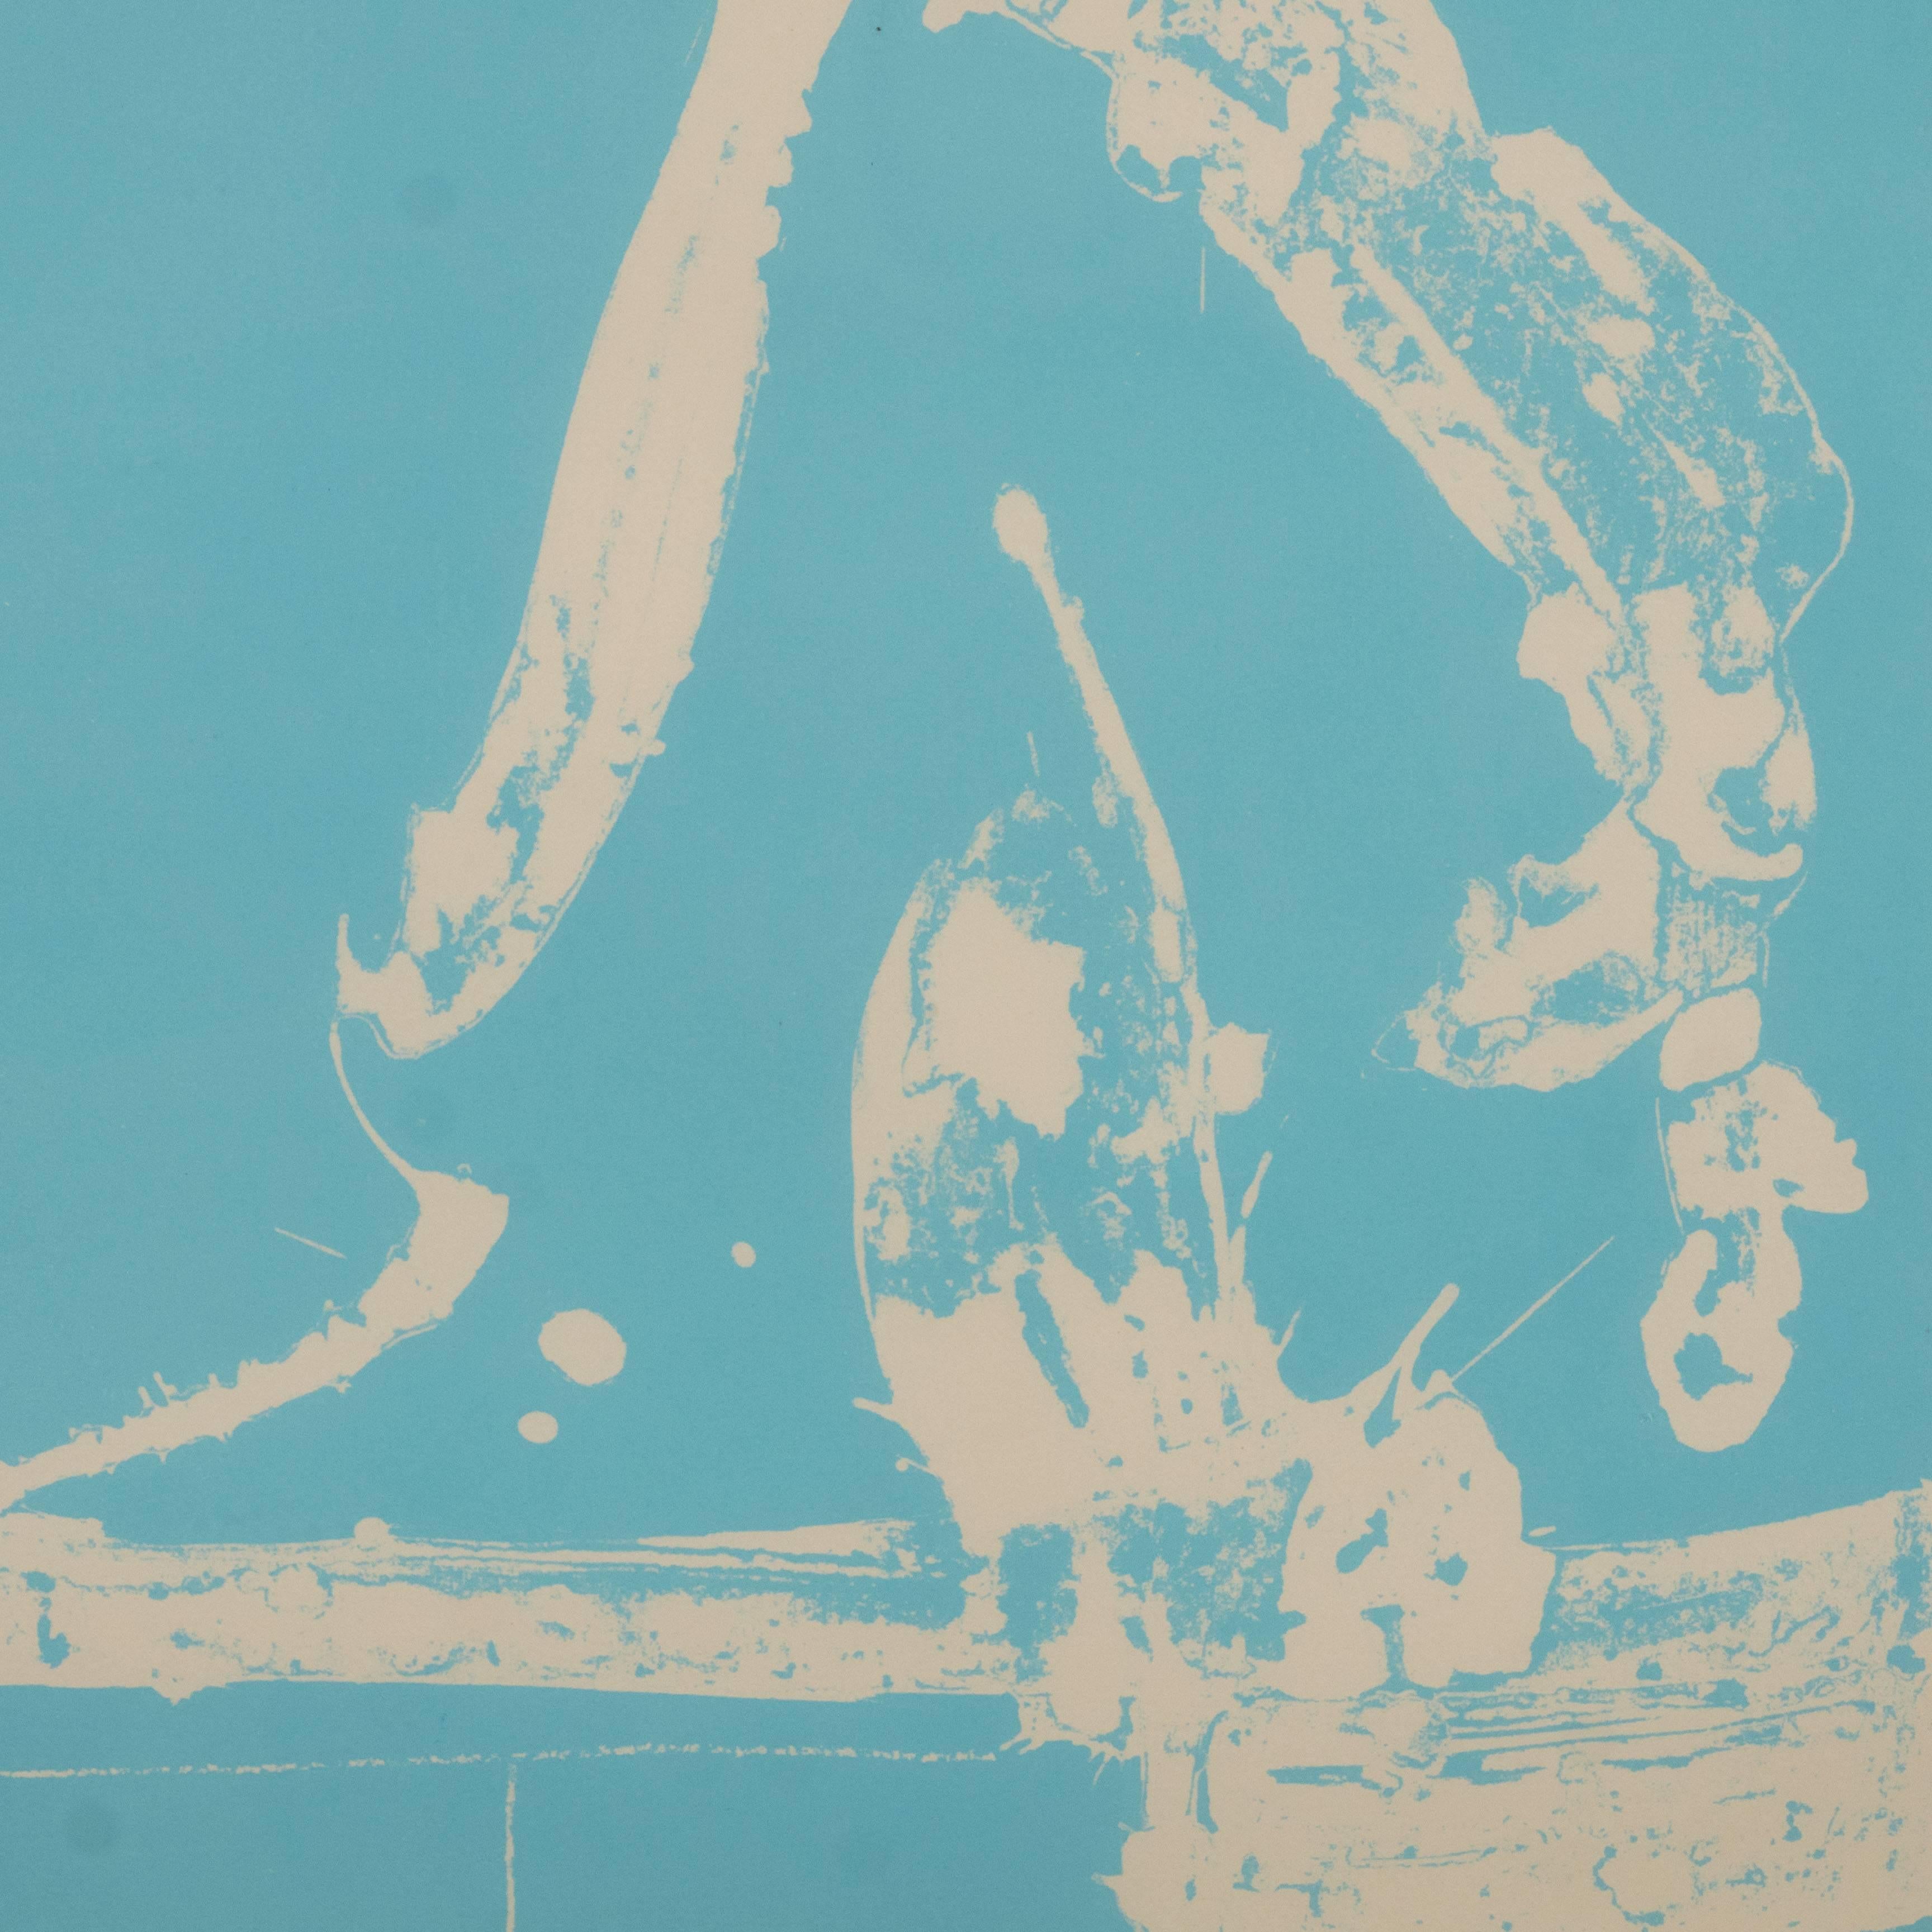 Robert Motherwell untitled abstract pale blue on white lithograph
9: Untitled (W.A.C. 56).
Lithograph printed in pale blue on white paper.
Initialed in penciel and numbered V/XX,
1966-1967.
In a simple chromed shadow-box type gallery